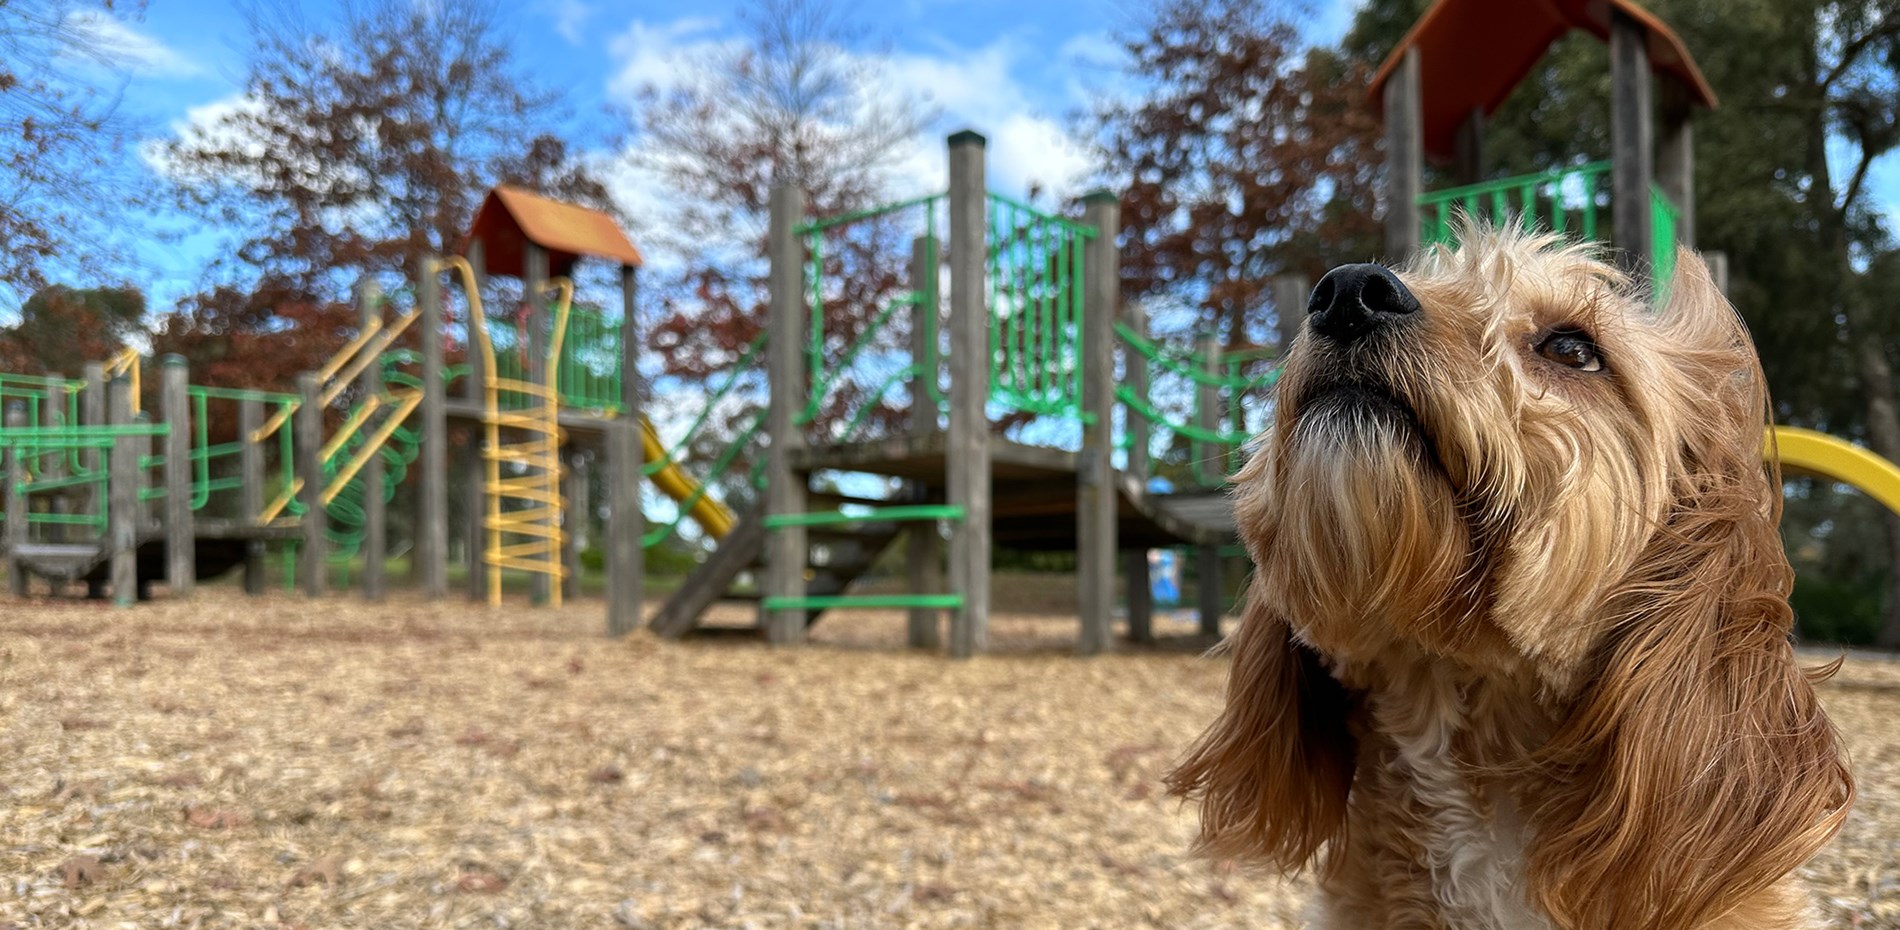 New dog park and playground: FULLY FUNDED Main Image